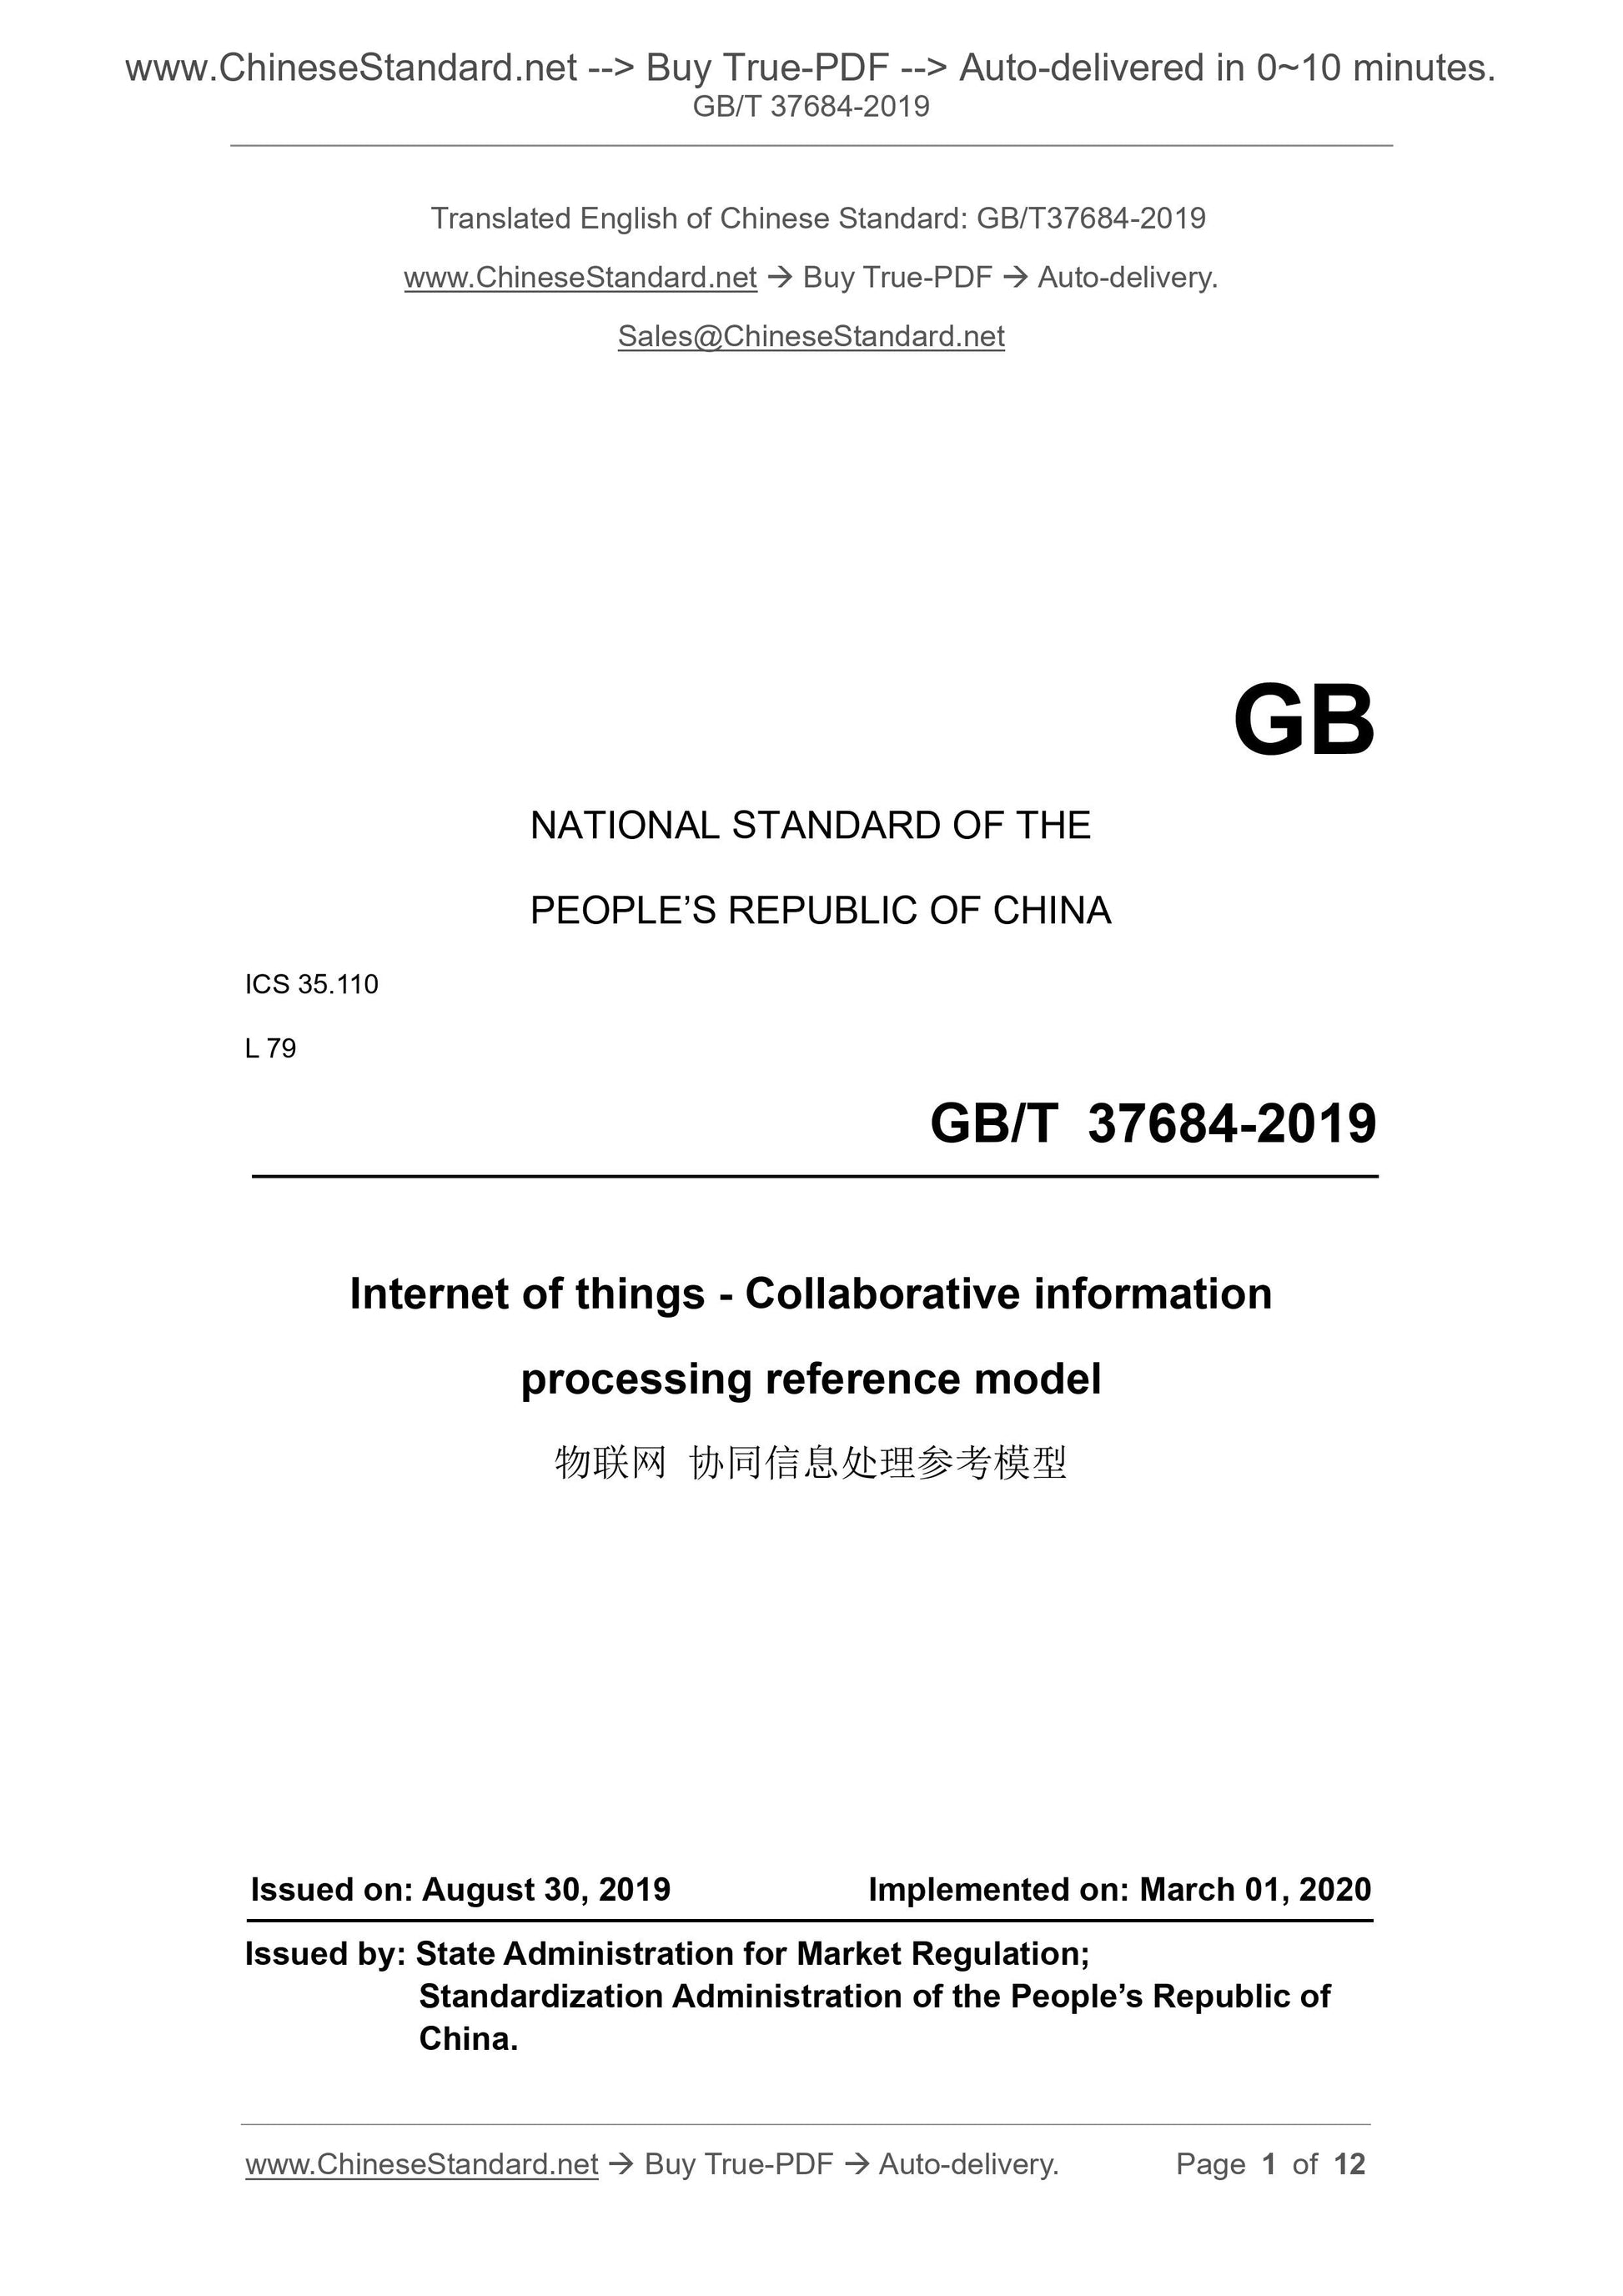 GB/T 37684-2019 Page 1